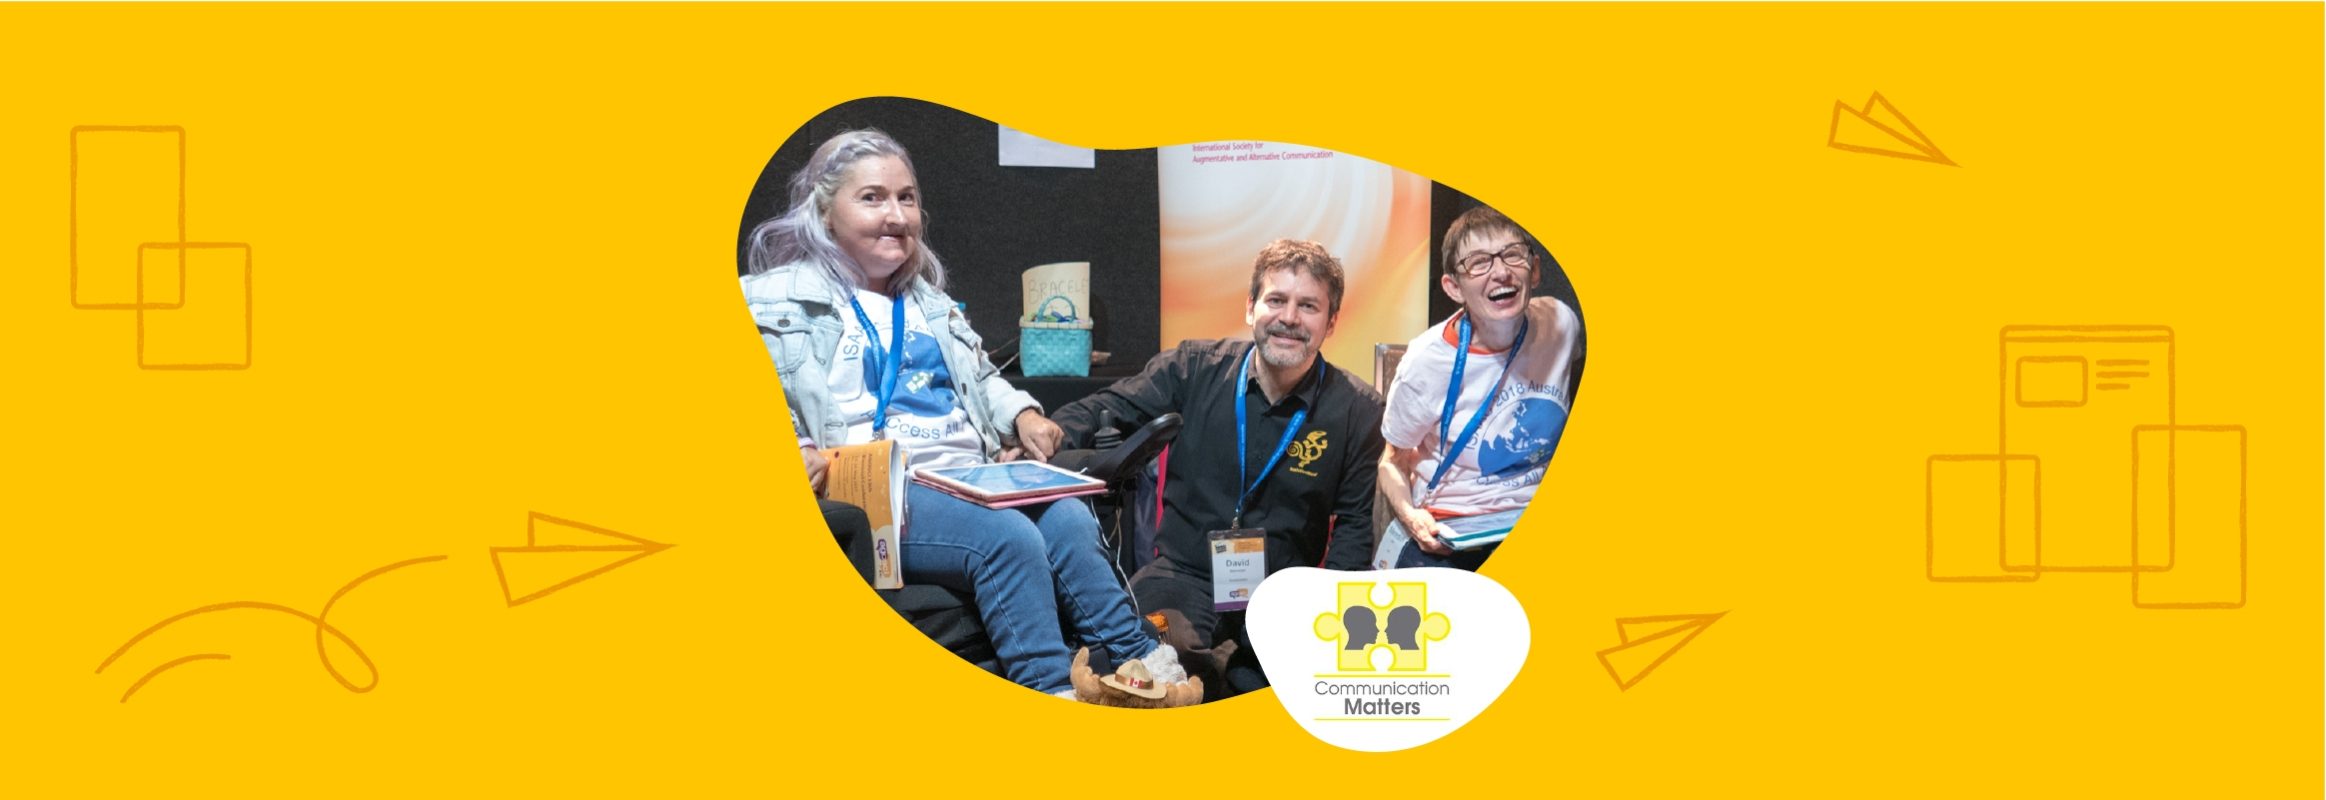 A wheelchair user and two non-users are looking at the camera. They're set on a yellow background with the "Communication matters" logo in the lower right corner